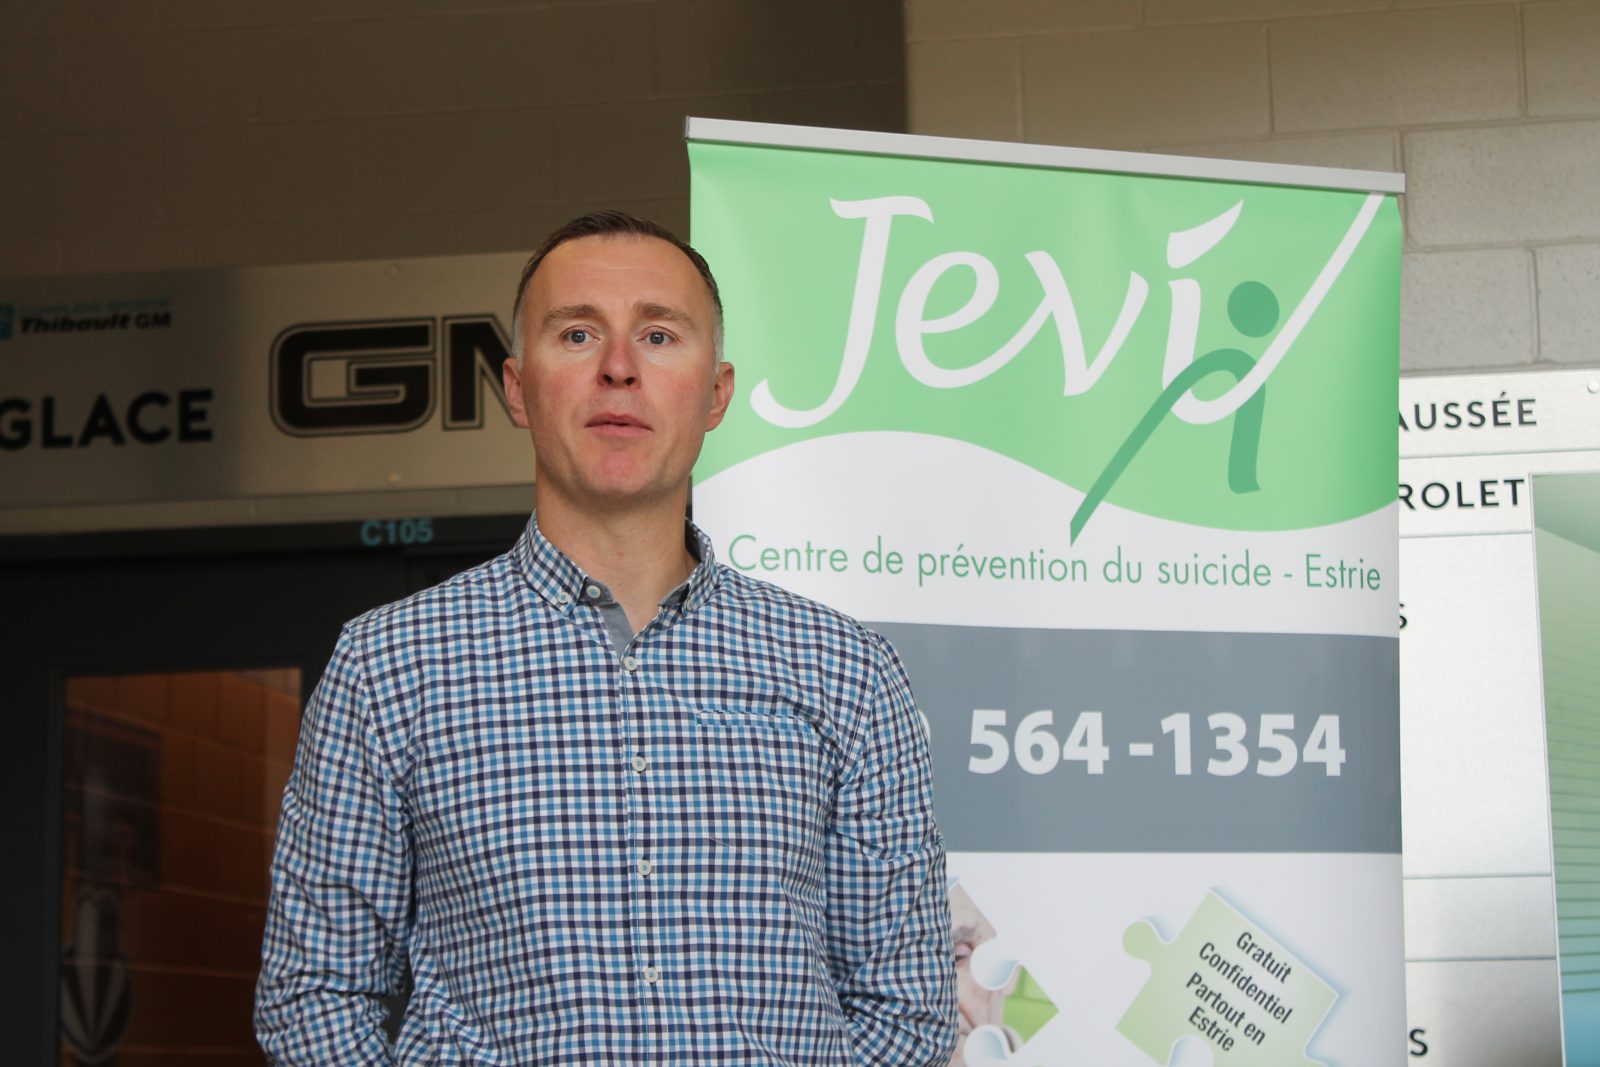 Hockey Sherbrooke teams up with JEVI on suicide prevention